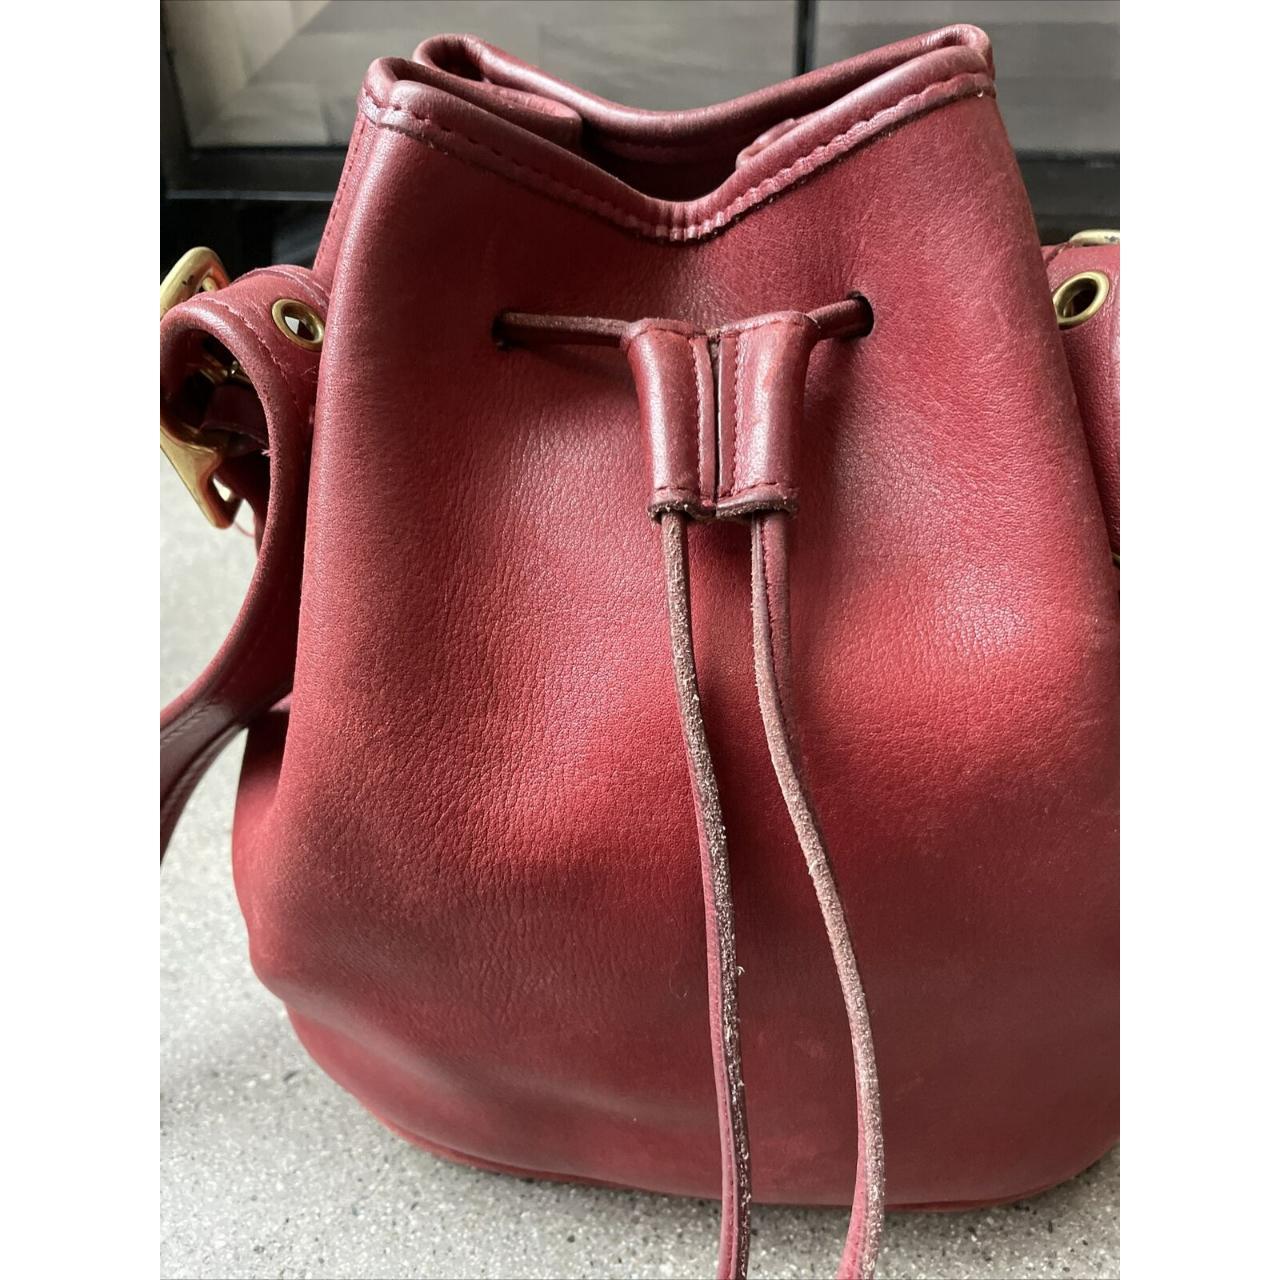 Tory Burch brown leather bucket bag with adjustable - Depop